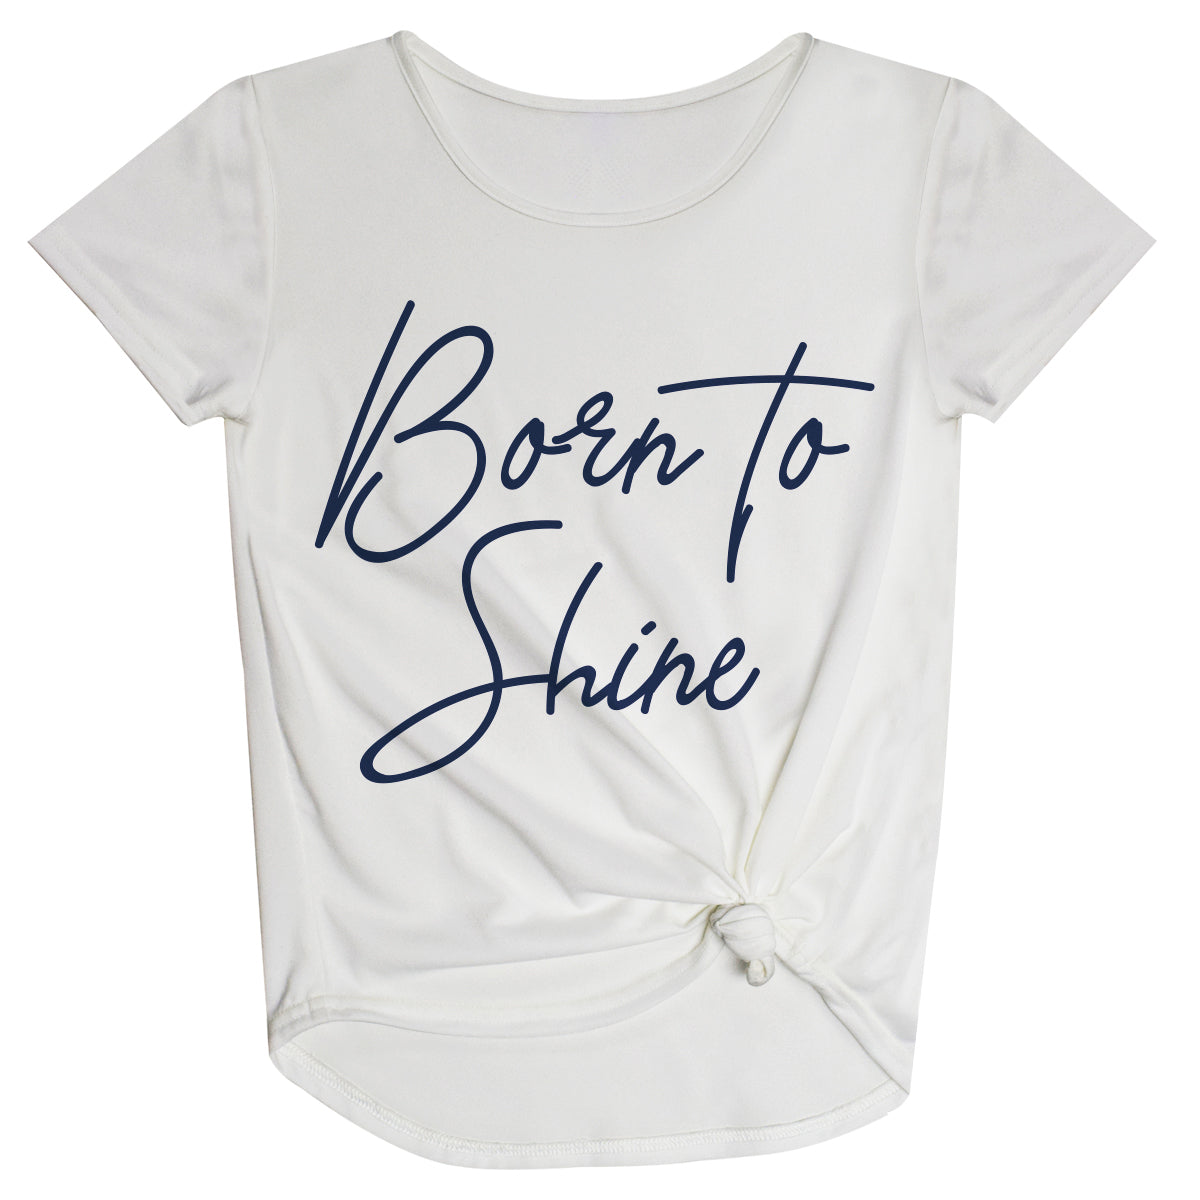 Born To Shine White Short Sleeve Knot Top